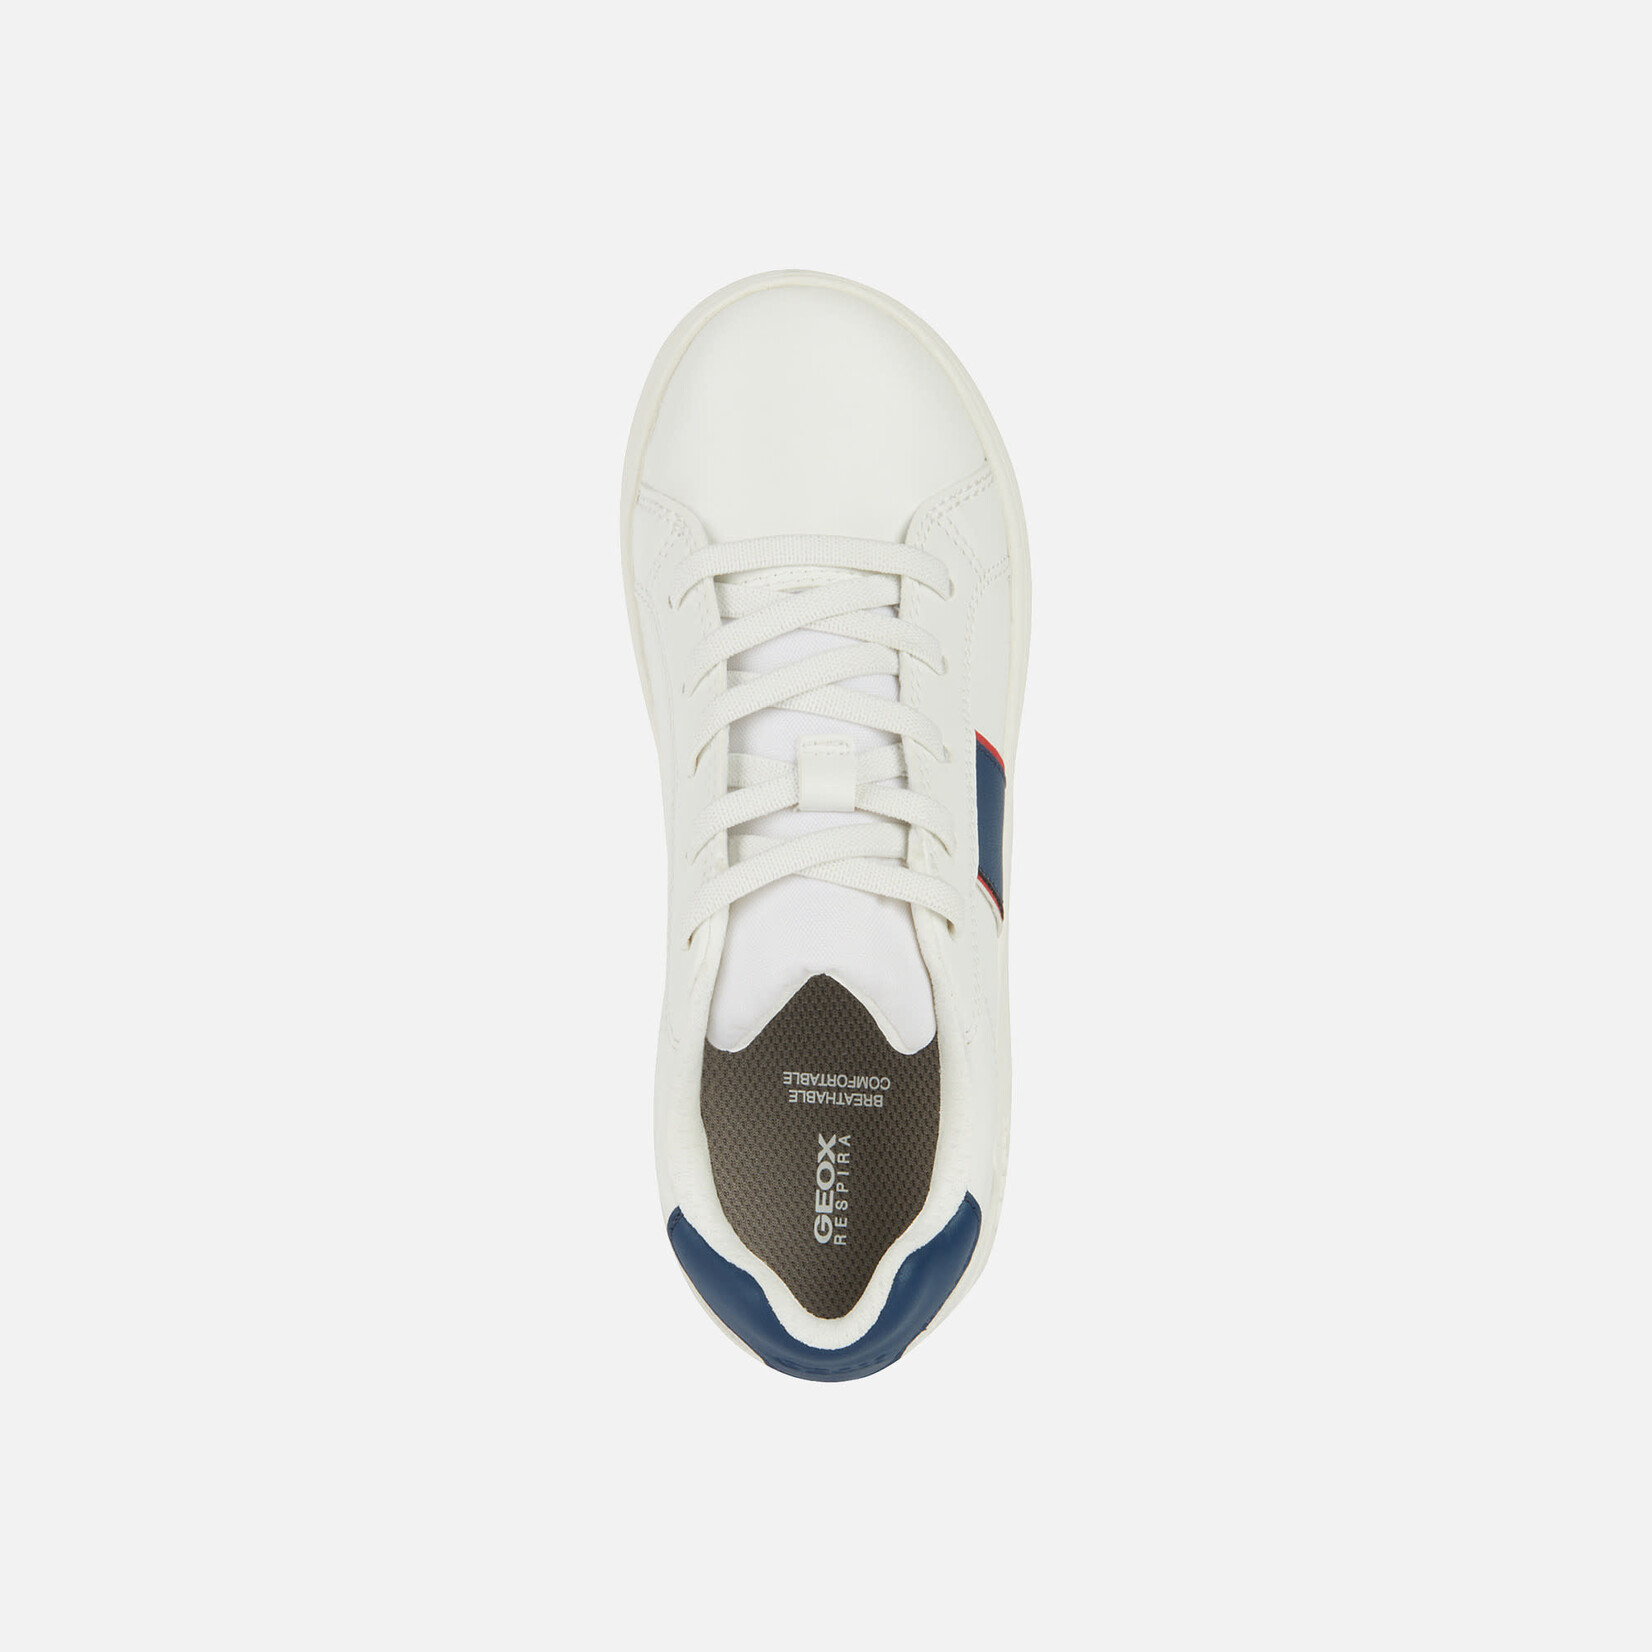 Geox GEOX - White synthetic leather sneakers 'Eclyper - White/Navy'